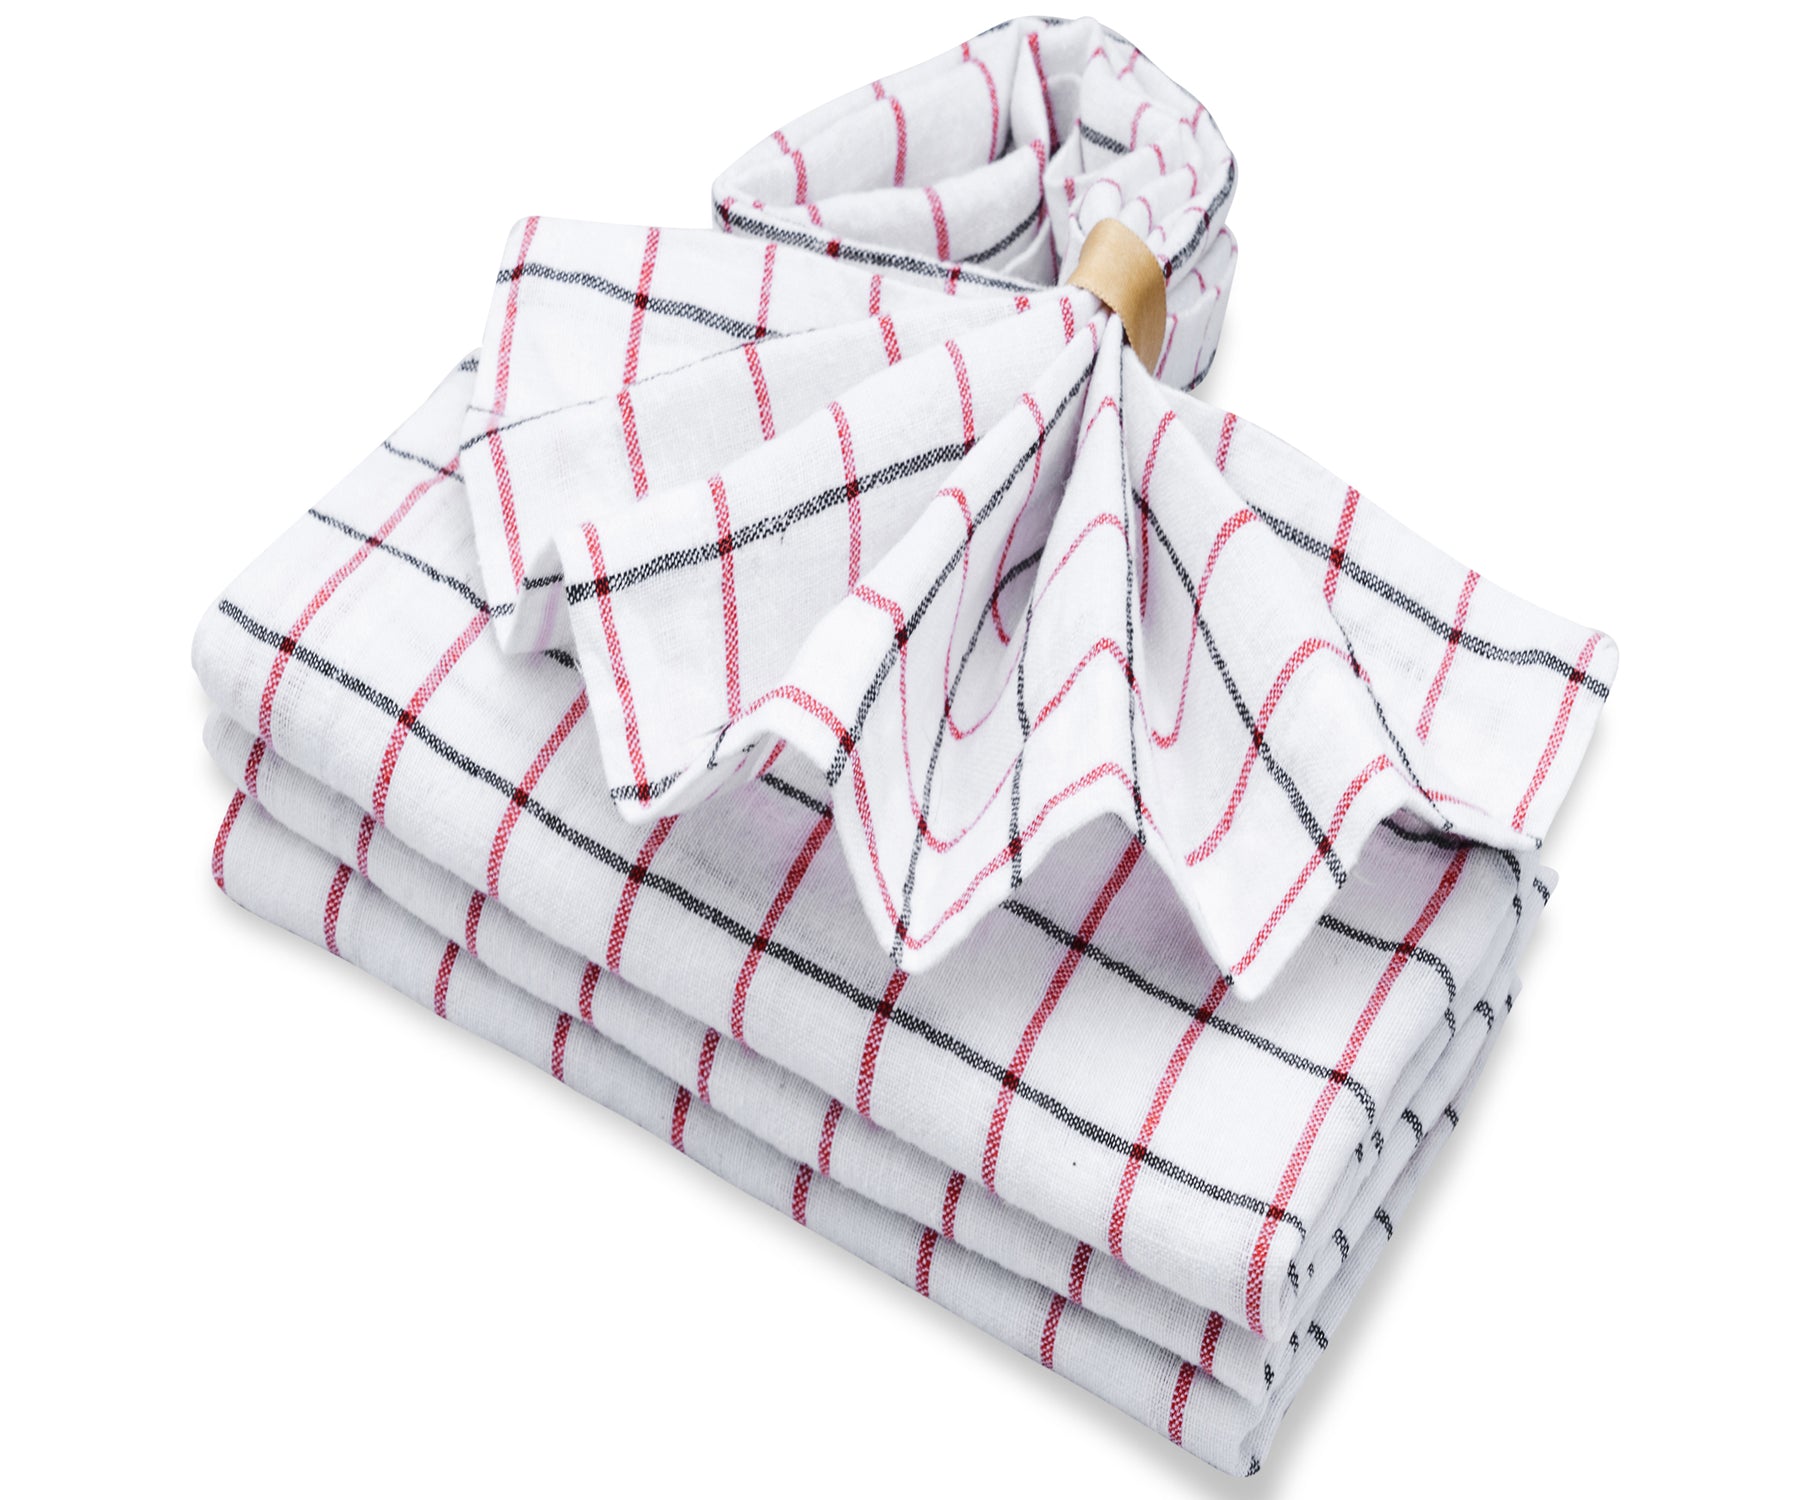 white and black cloth napkins, perfect for everyday use or special occasions,Line-checked-white-napkin.